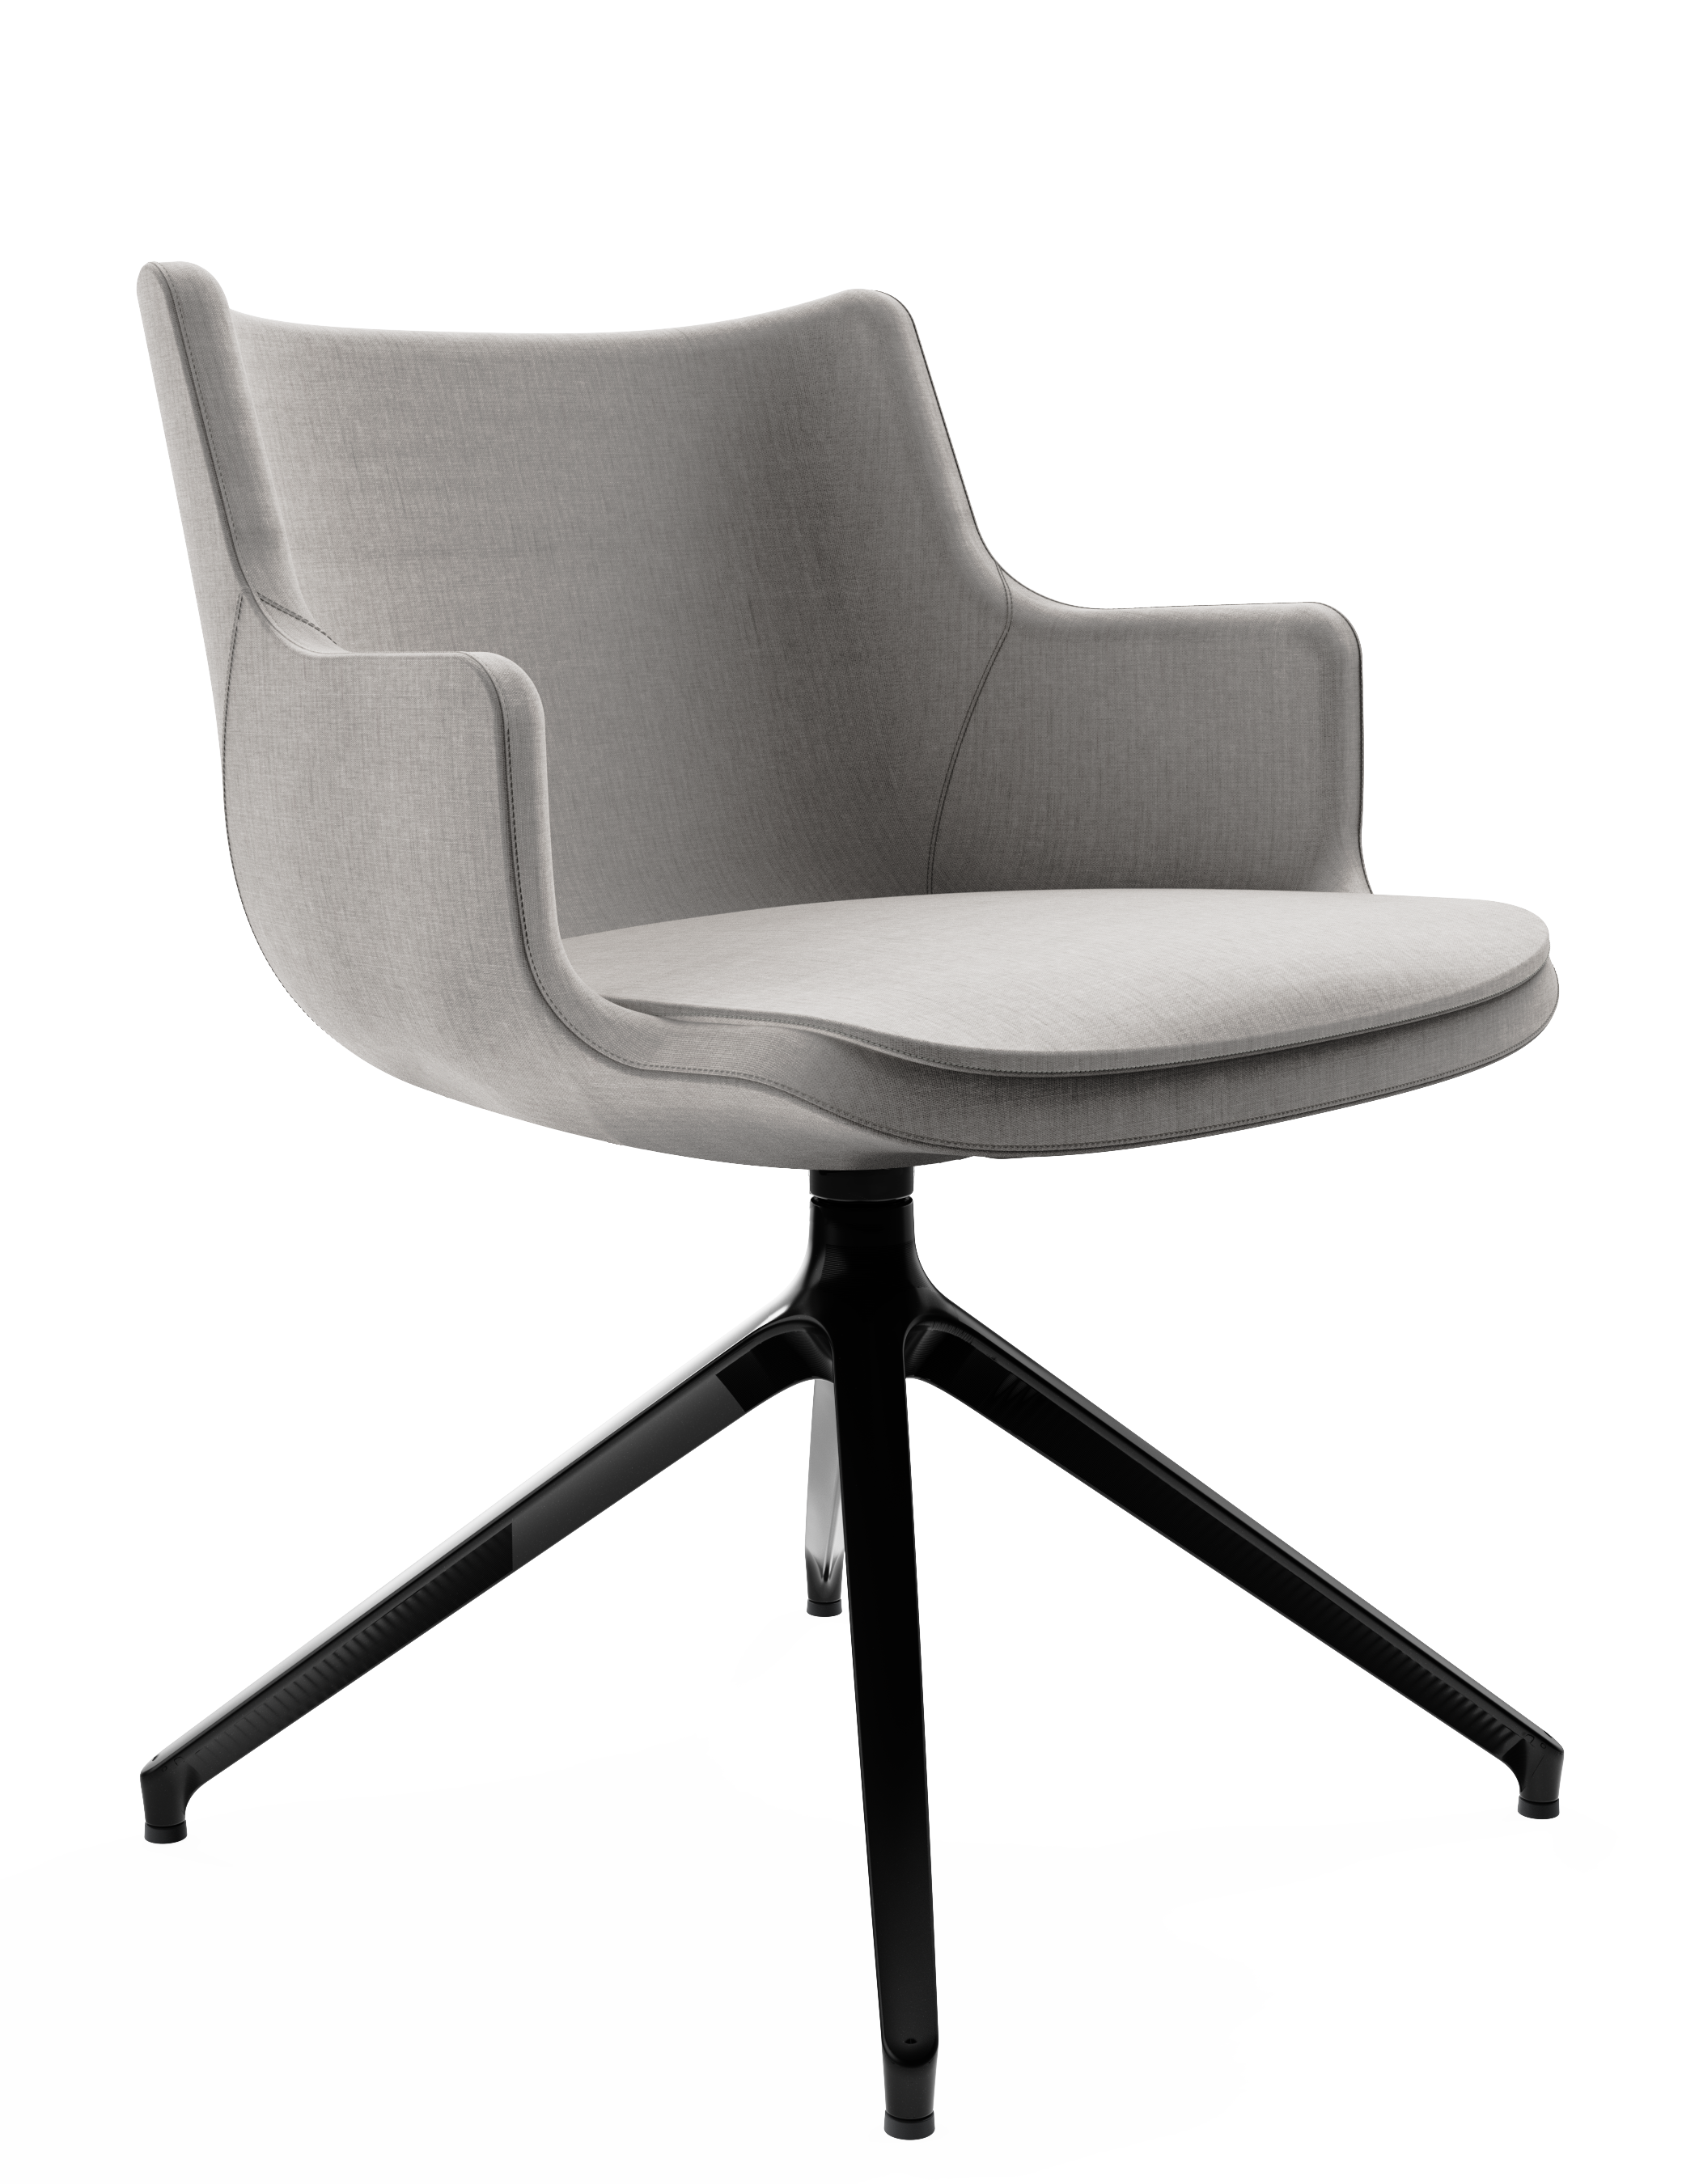 WS - Contour chair - Low, 4 star pyramidal black base (Front angle)